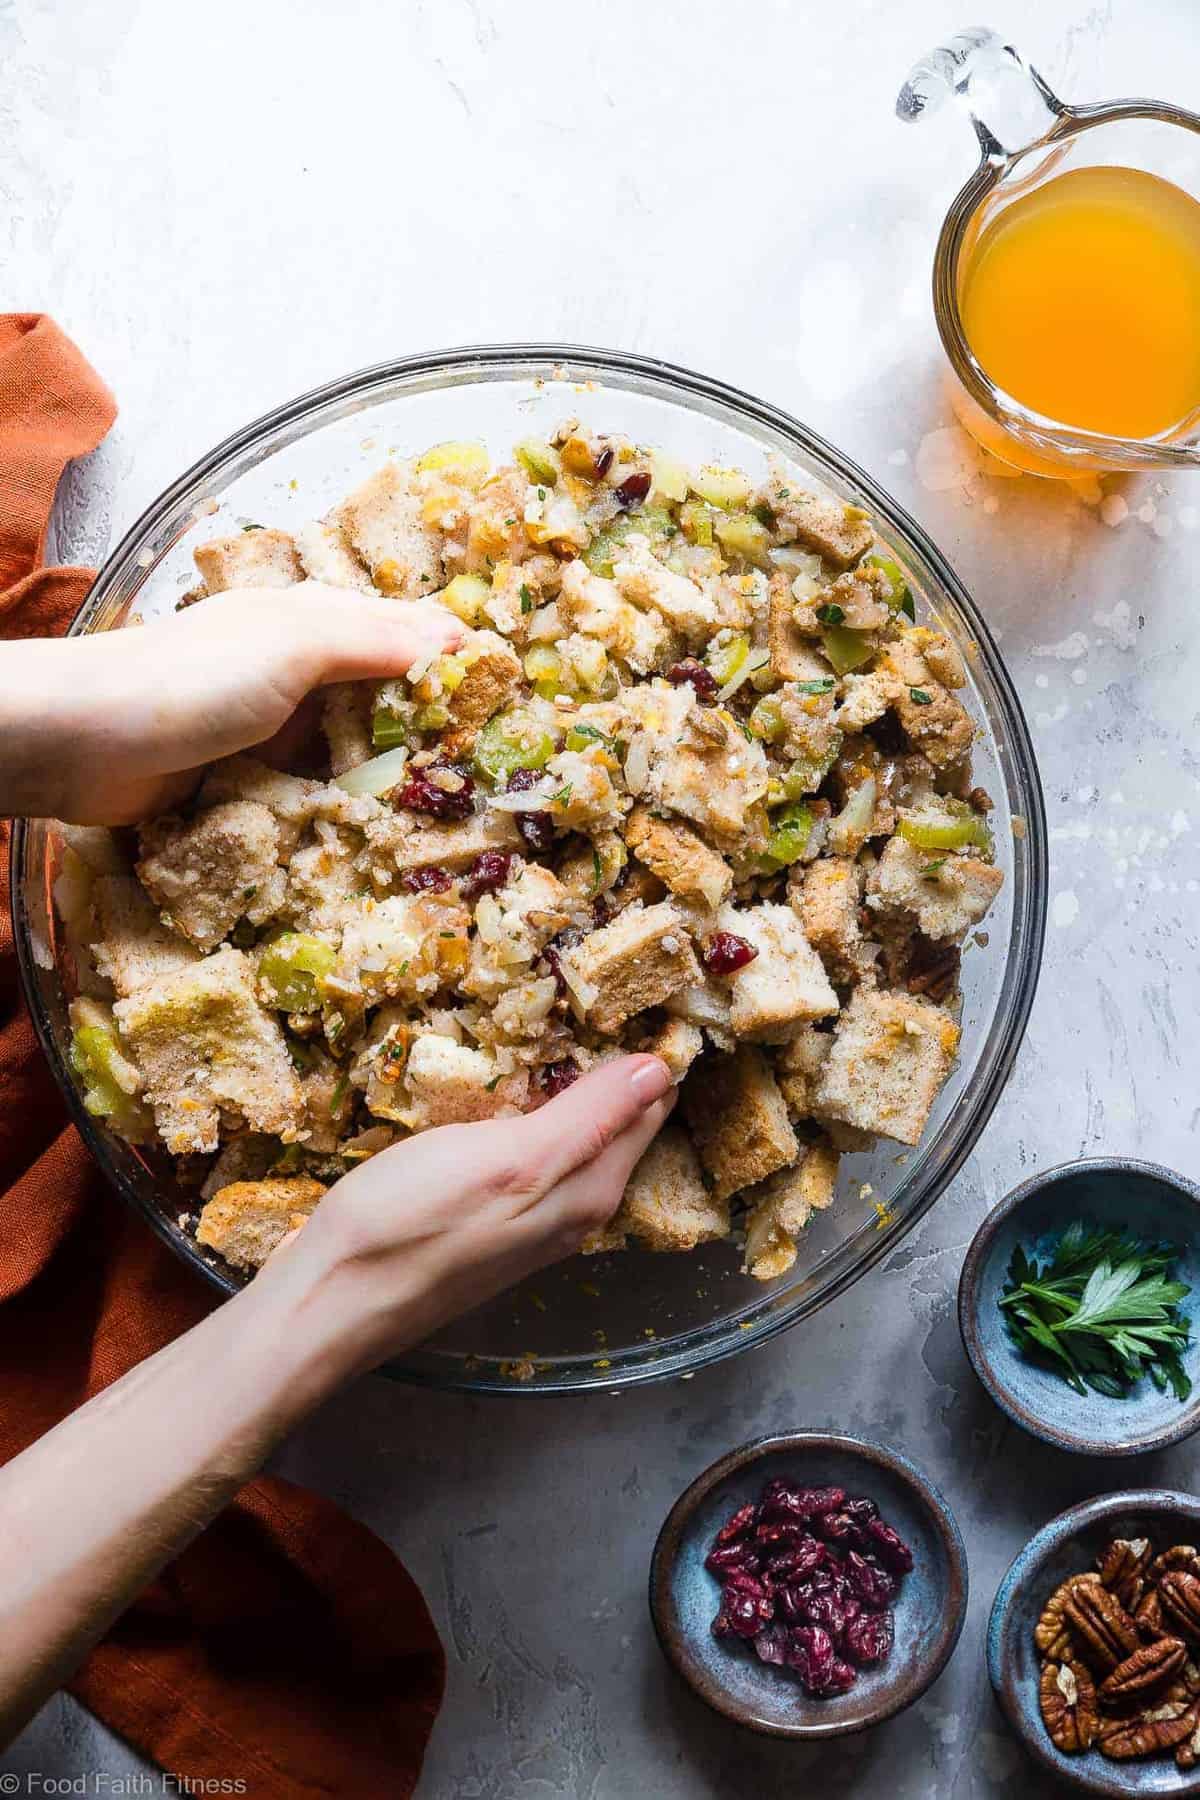 Harvest Gluten Free Best Vegan Stuffing - This moist Dairy Free Simple Vegan Stuffing for Thanksgiving is loaded with fall flavors like pears, oranges, cranberries and cozy cinnamon! Easy, gluten free and SO tasty! | #Foodfaitfitness | #Glutenfree #Vegan #Dairyfree #Healthy #Thanksgiving